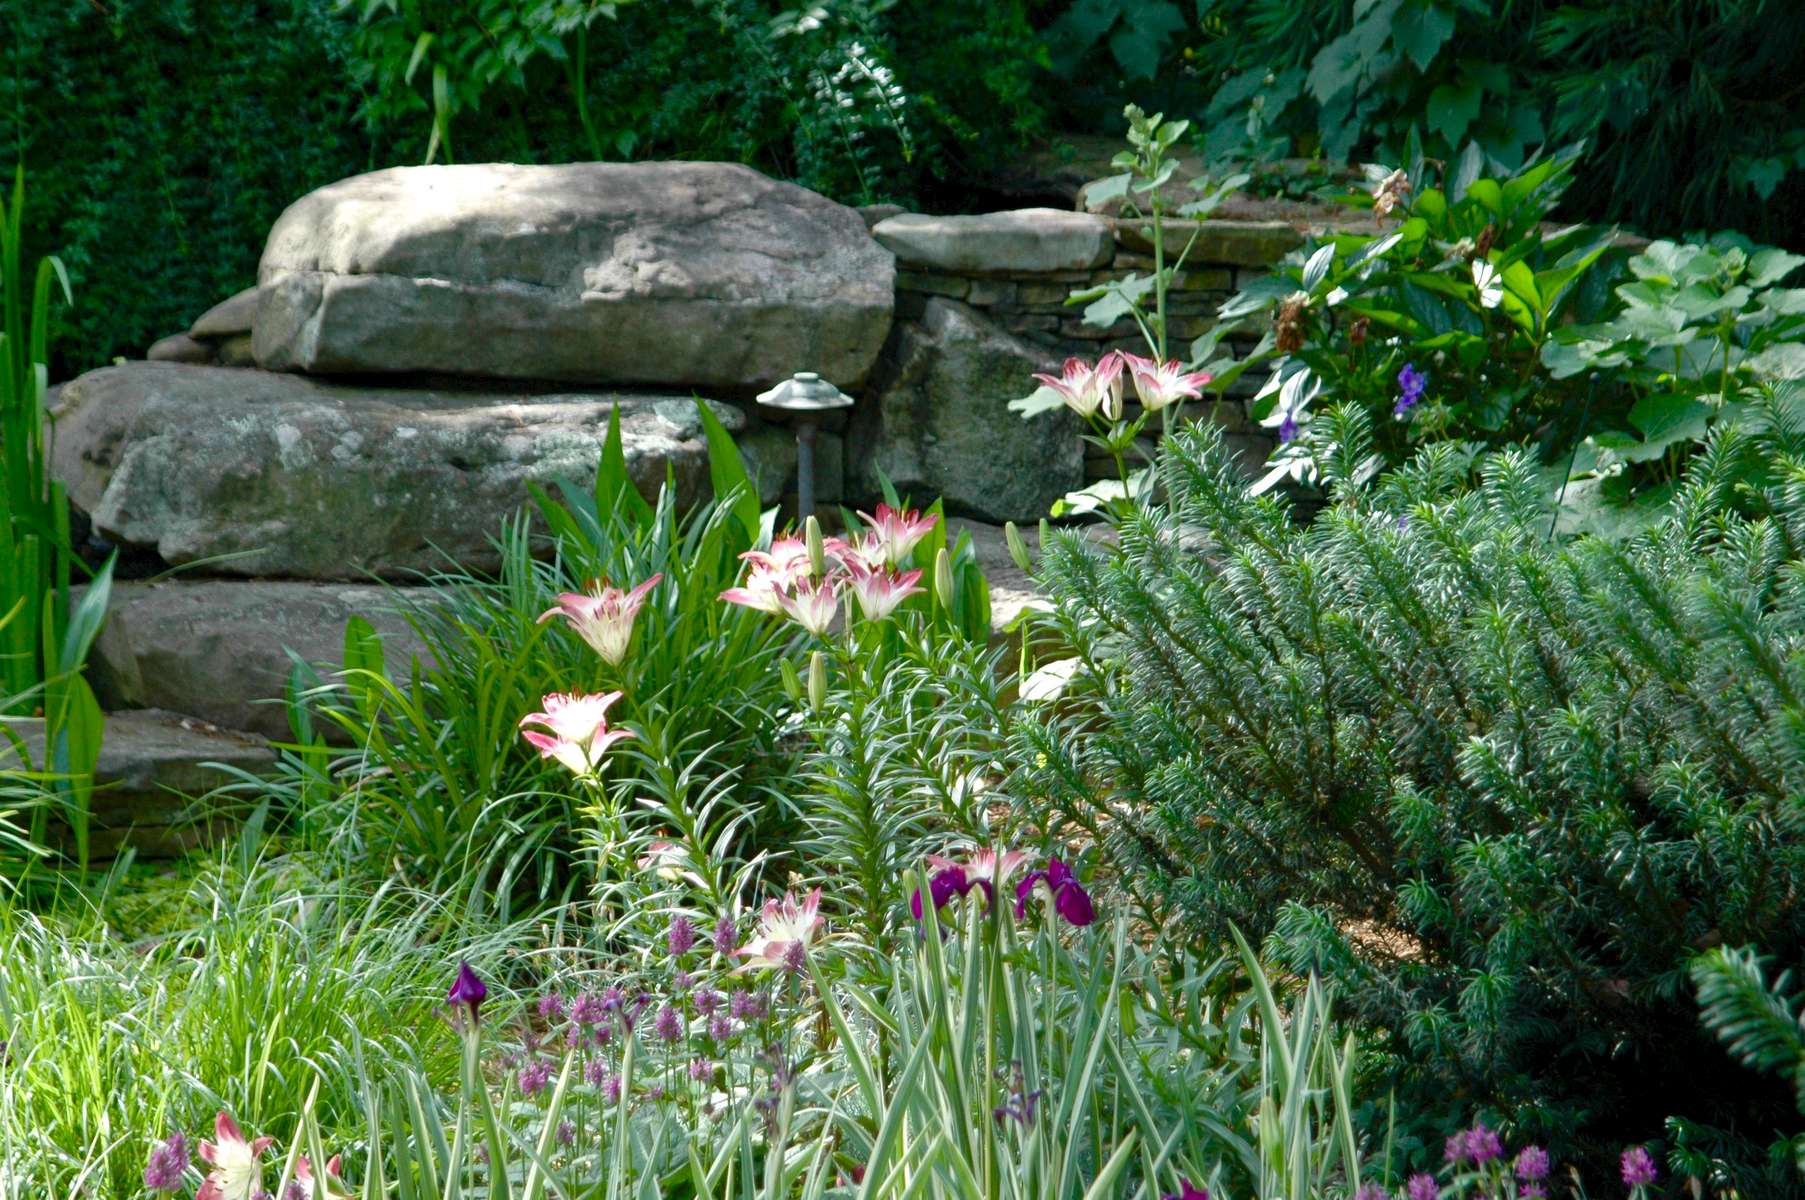 Lollipop Asiatic lilies and Siberian Iris are among the hopefuls stealing the starring role of this layered cottage garden surrounded by heavy river rocks as the backdrop.